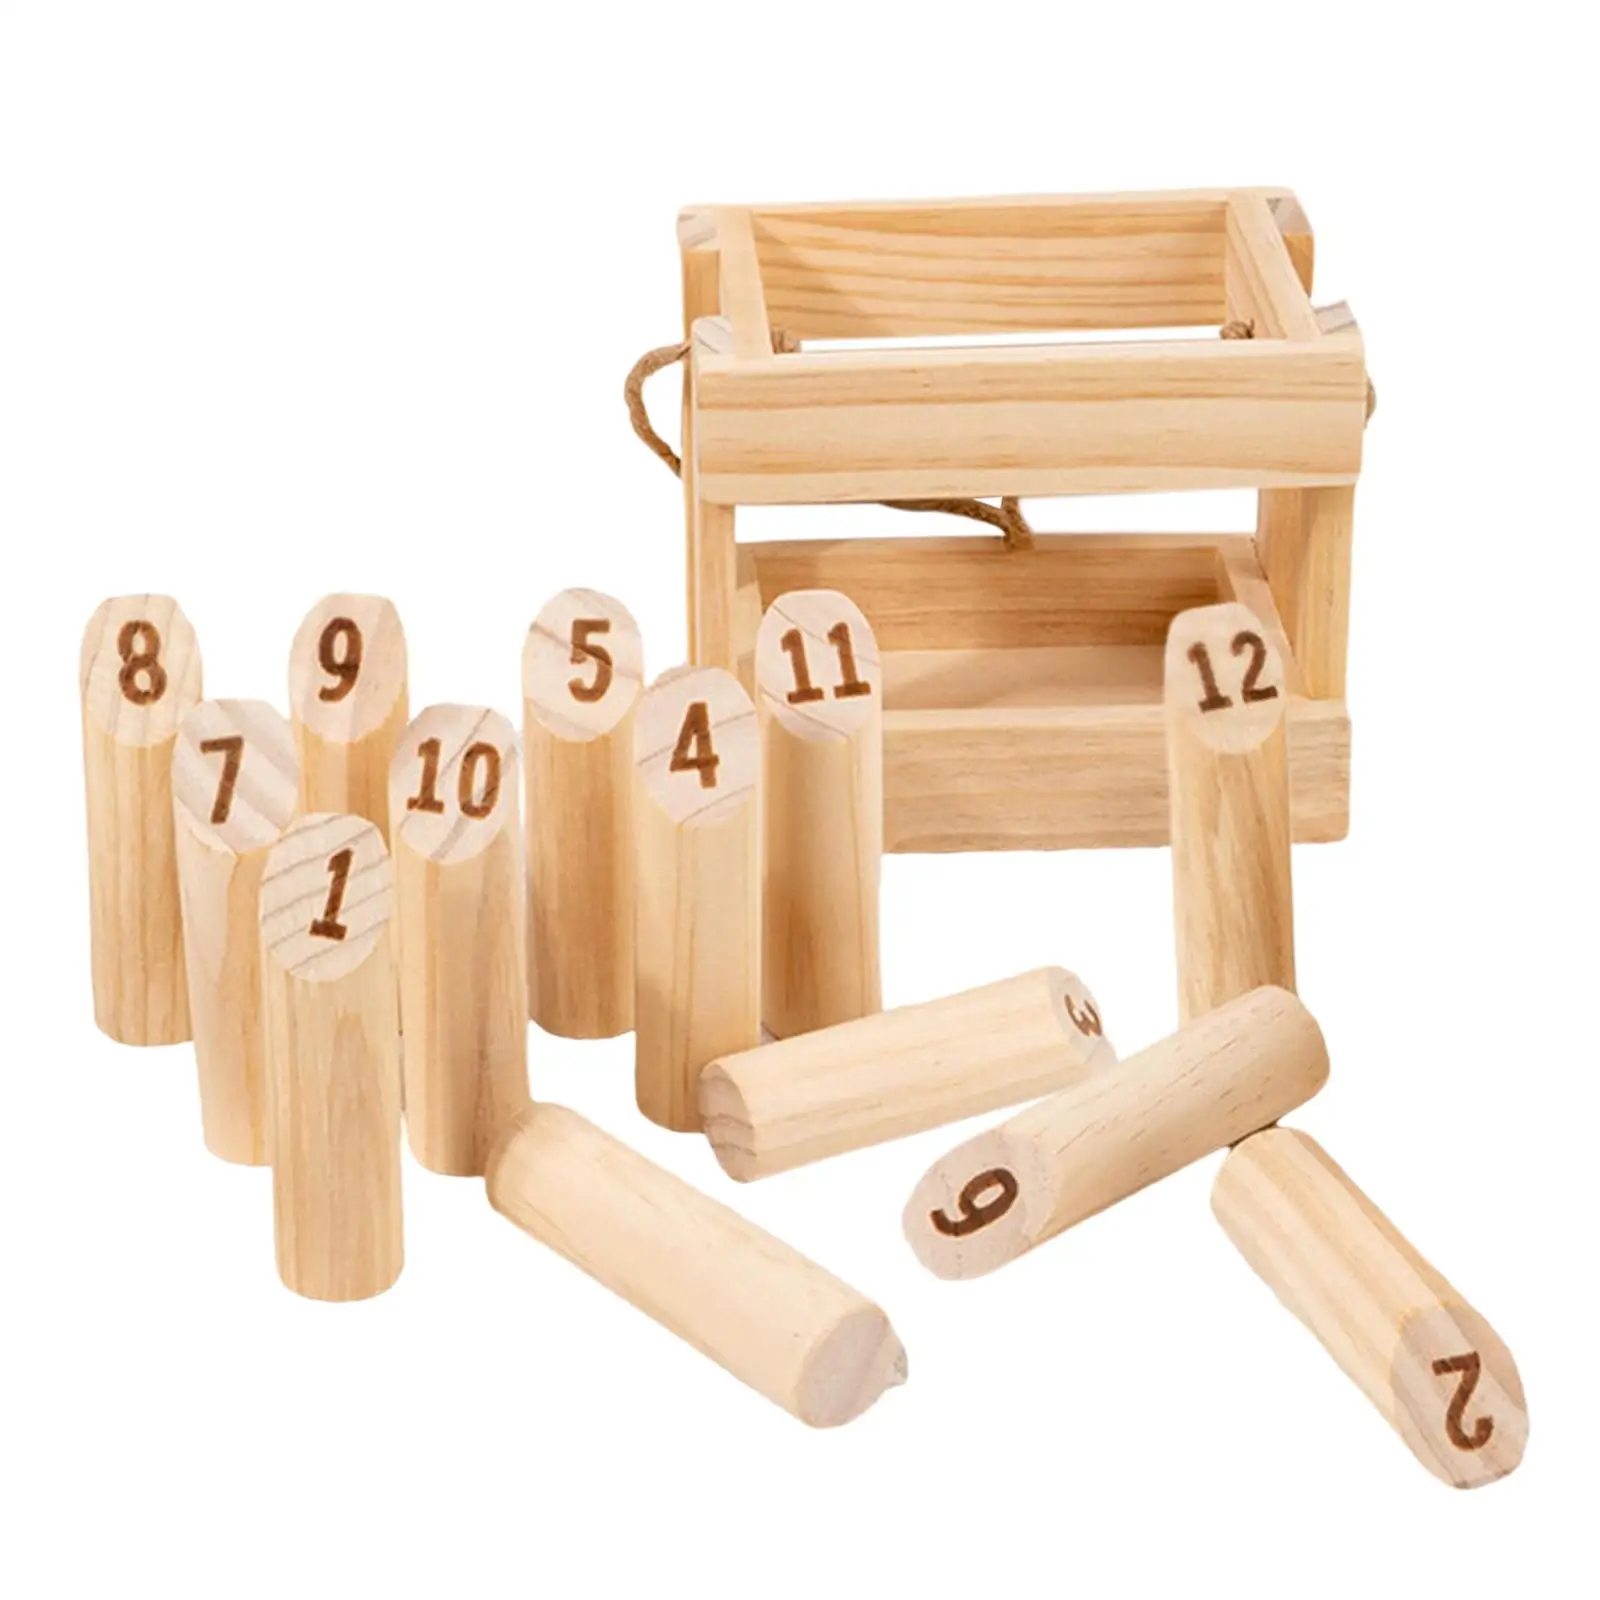 Wooden Throwing Game 12 Pcs Numbered Pins Premium Hardwood for Lawn Adults